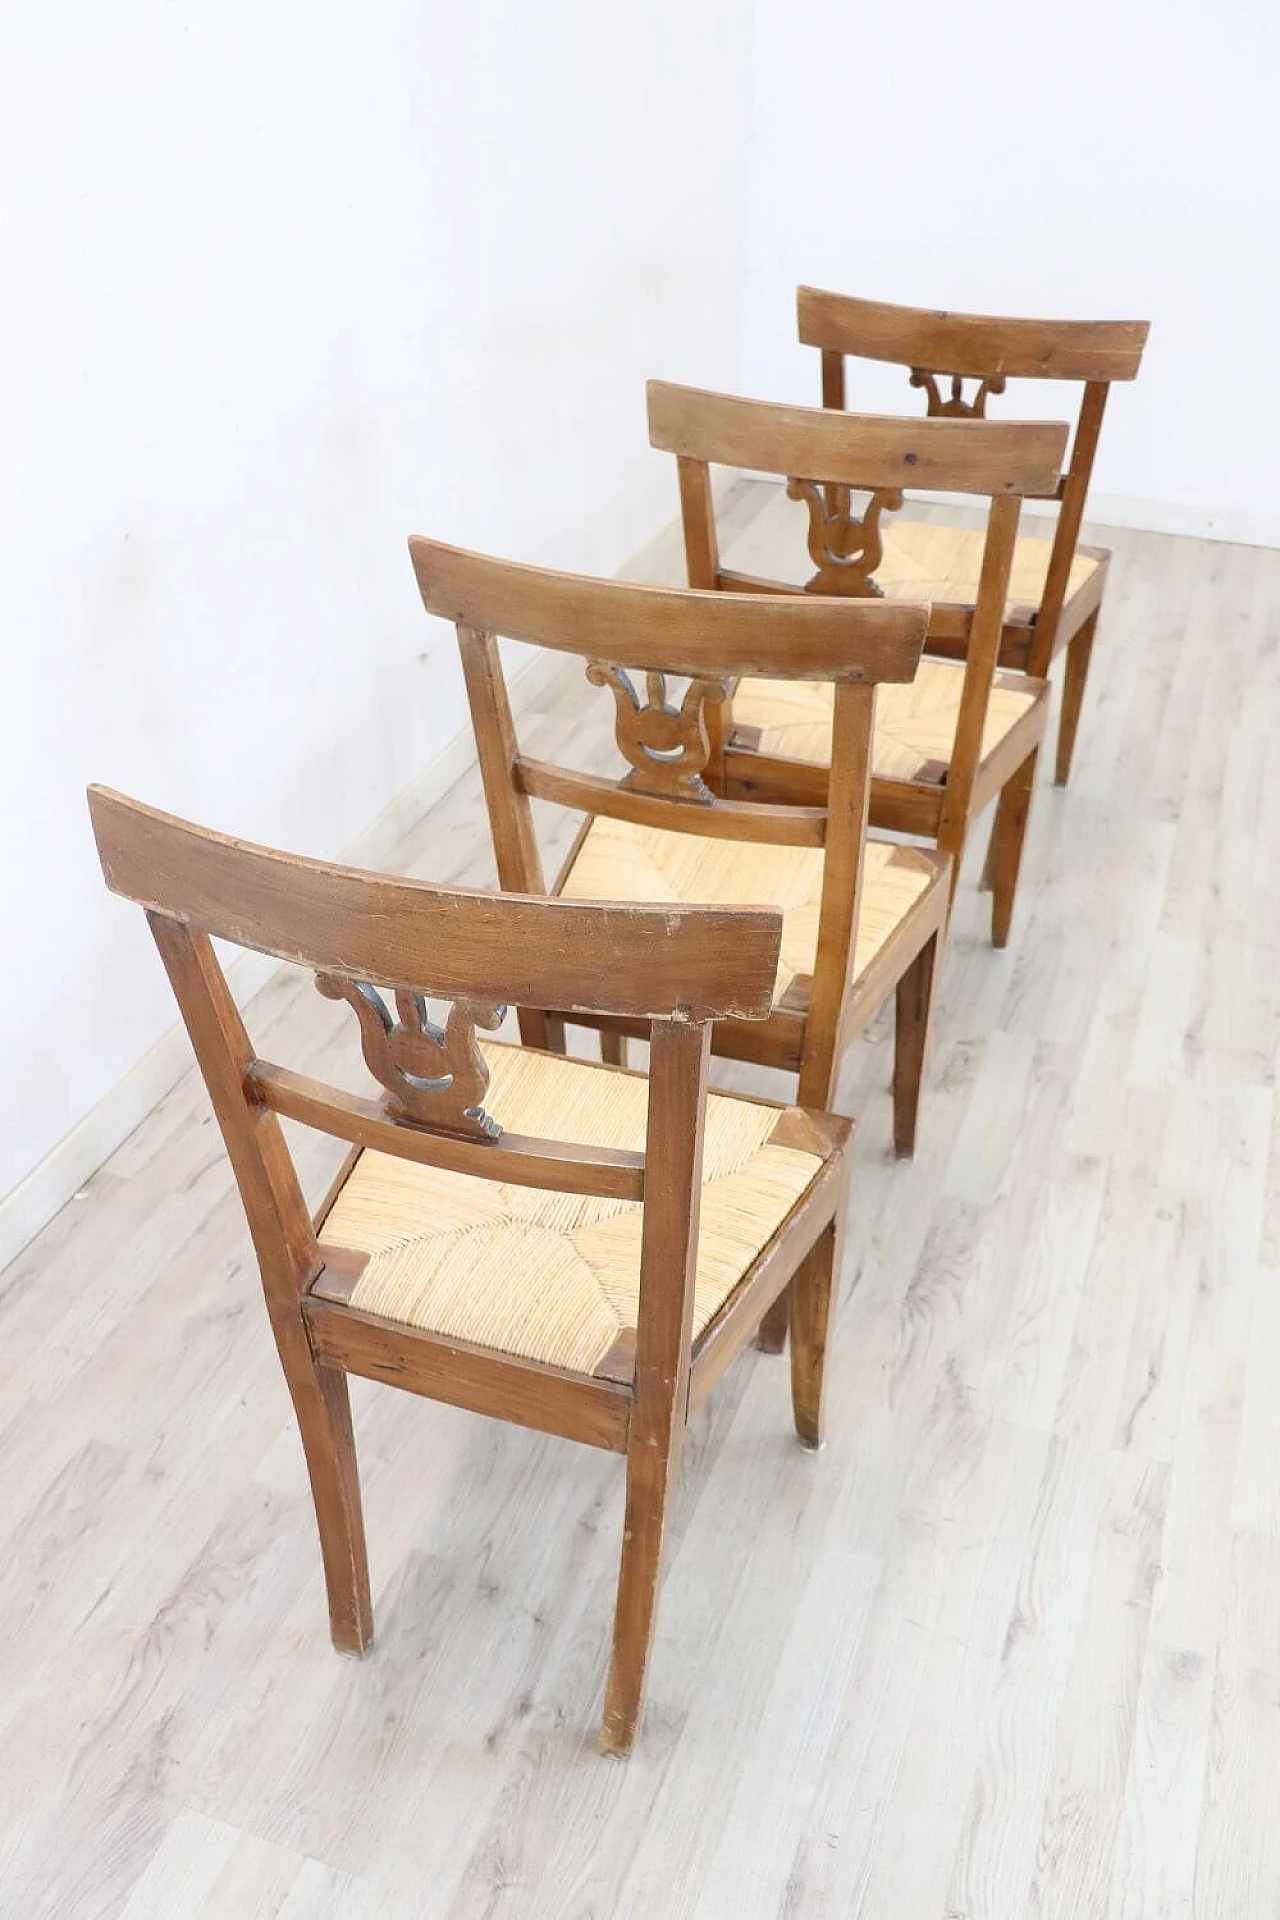 4 Empire walnut chairs with straw seat, early 19th century 1305339